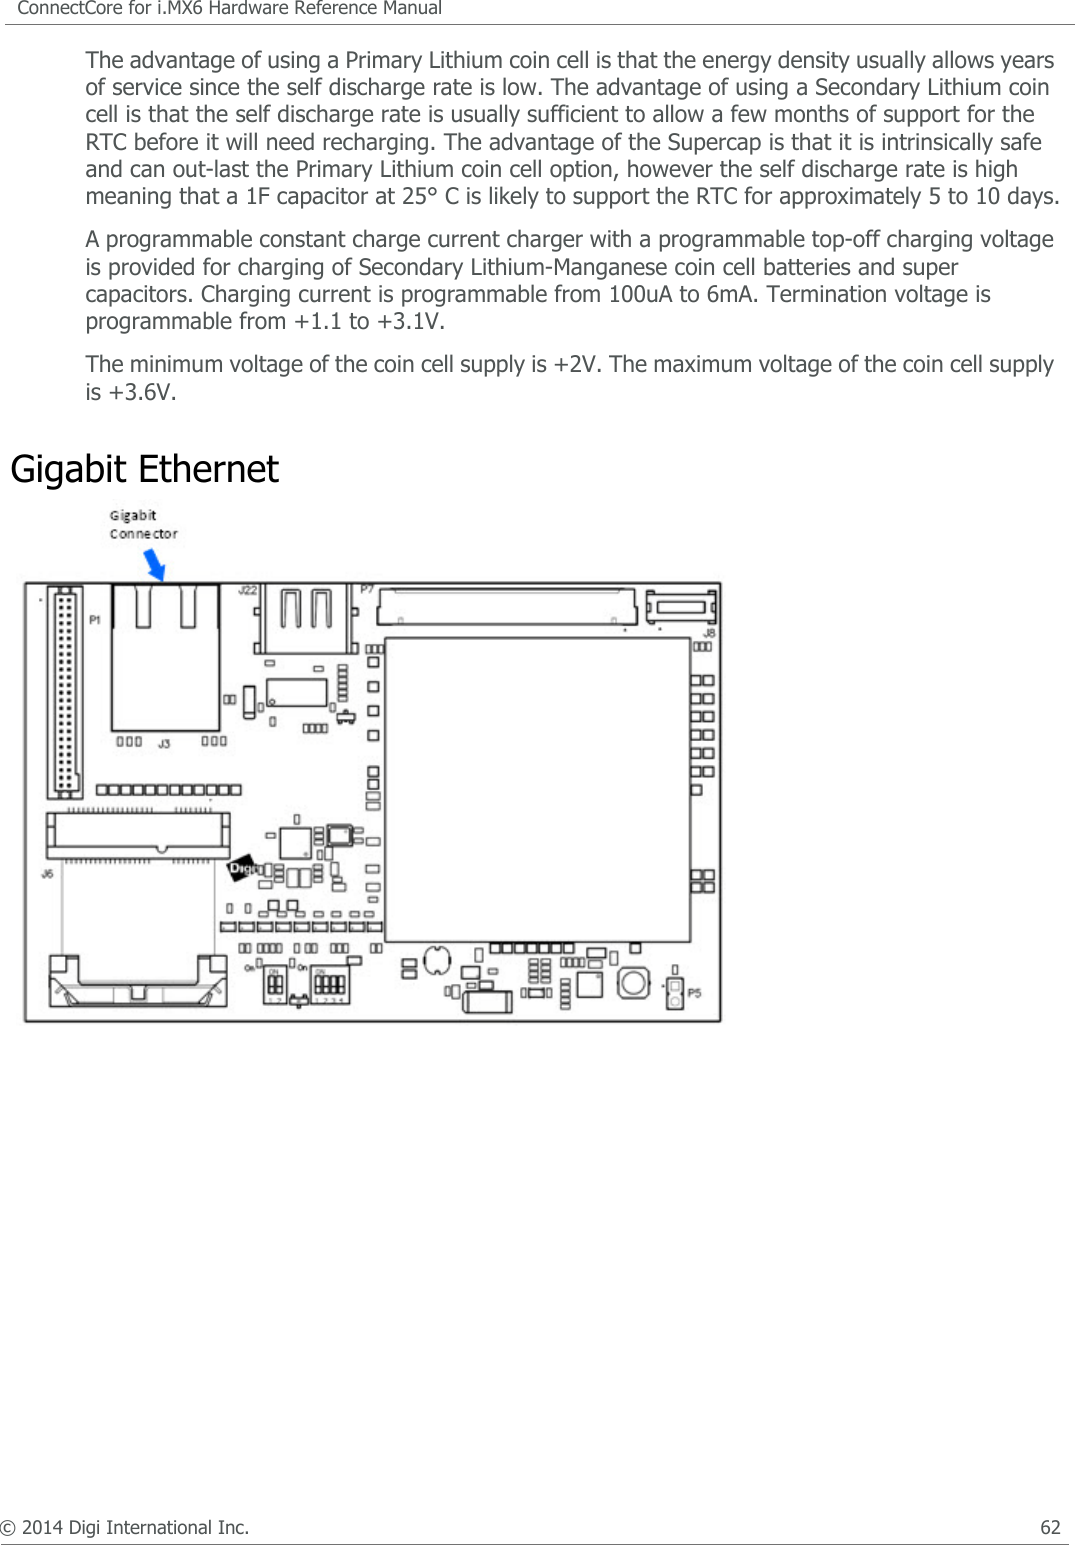 © 2014 Digi International Inc.      60ConnectCore for i.MX6 Hardware Reference ManualGigabit Ethernet LEDsThe Gigabit Ethernet PHY has two outputs to indicate the link and activity status of the port. These outputs are connected to a green LED and to a yellow LED, integrated on the Ethernet connector. The following table shows the link/activity status indicated by the two LEDs.5V RegulatorThe adapter board has several interfaces that need a regulated 5V supply. To generate this supply one LTC3125 step-up DC/DC converter is used. This DC/DC converted can generate a regulated 5V from a 1.8V to 5.5V input supply. The LTC3125 will maintain voltage regulation even when the input voltage is above the desired output voltage.The 5V regulator will be enabled by the ConnectCore 6 signal PWR_EN. On low power mode this regulator will be disabled. The following table shows the interfaces of the adapter board where the +5V supply is connected.Yellow LED Green LED Link/Activity StatusOFF OFF Link offON OFF 1000 Link/ No activityBlinking OFF 1000 Link/ activity (Rx, Tx)OFF ON 100 Link/ No activity OFF Blinking 100 Link/Activity (Rx, Tx)ON ON 10 Link/ No activityBlinking Blinking 10 Link/ activity (Rx, Tx)Interface CommentsUSBH1_VBUS Power supply for the USB Host controller of the i.MX6 CPULVDS1 Supply for the LVDS backlight